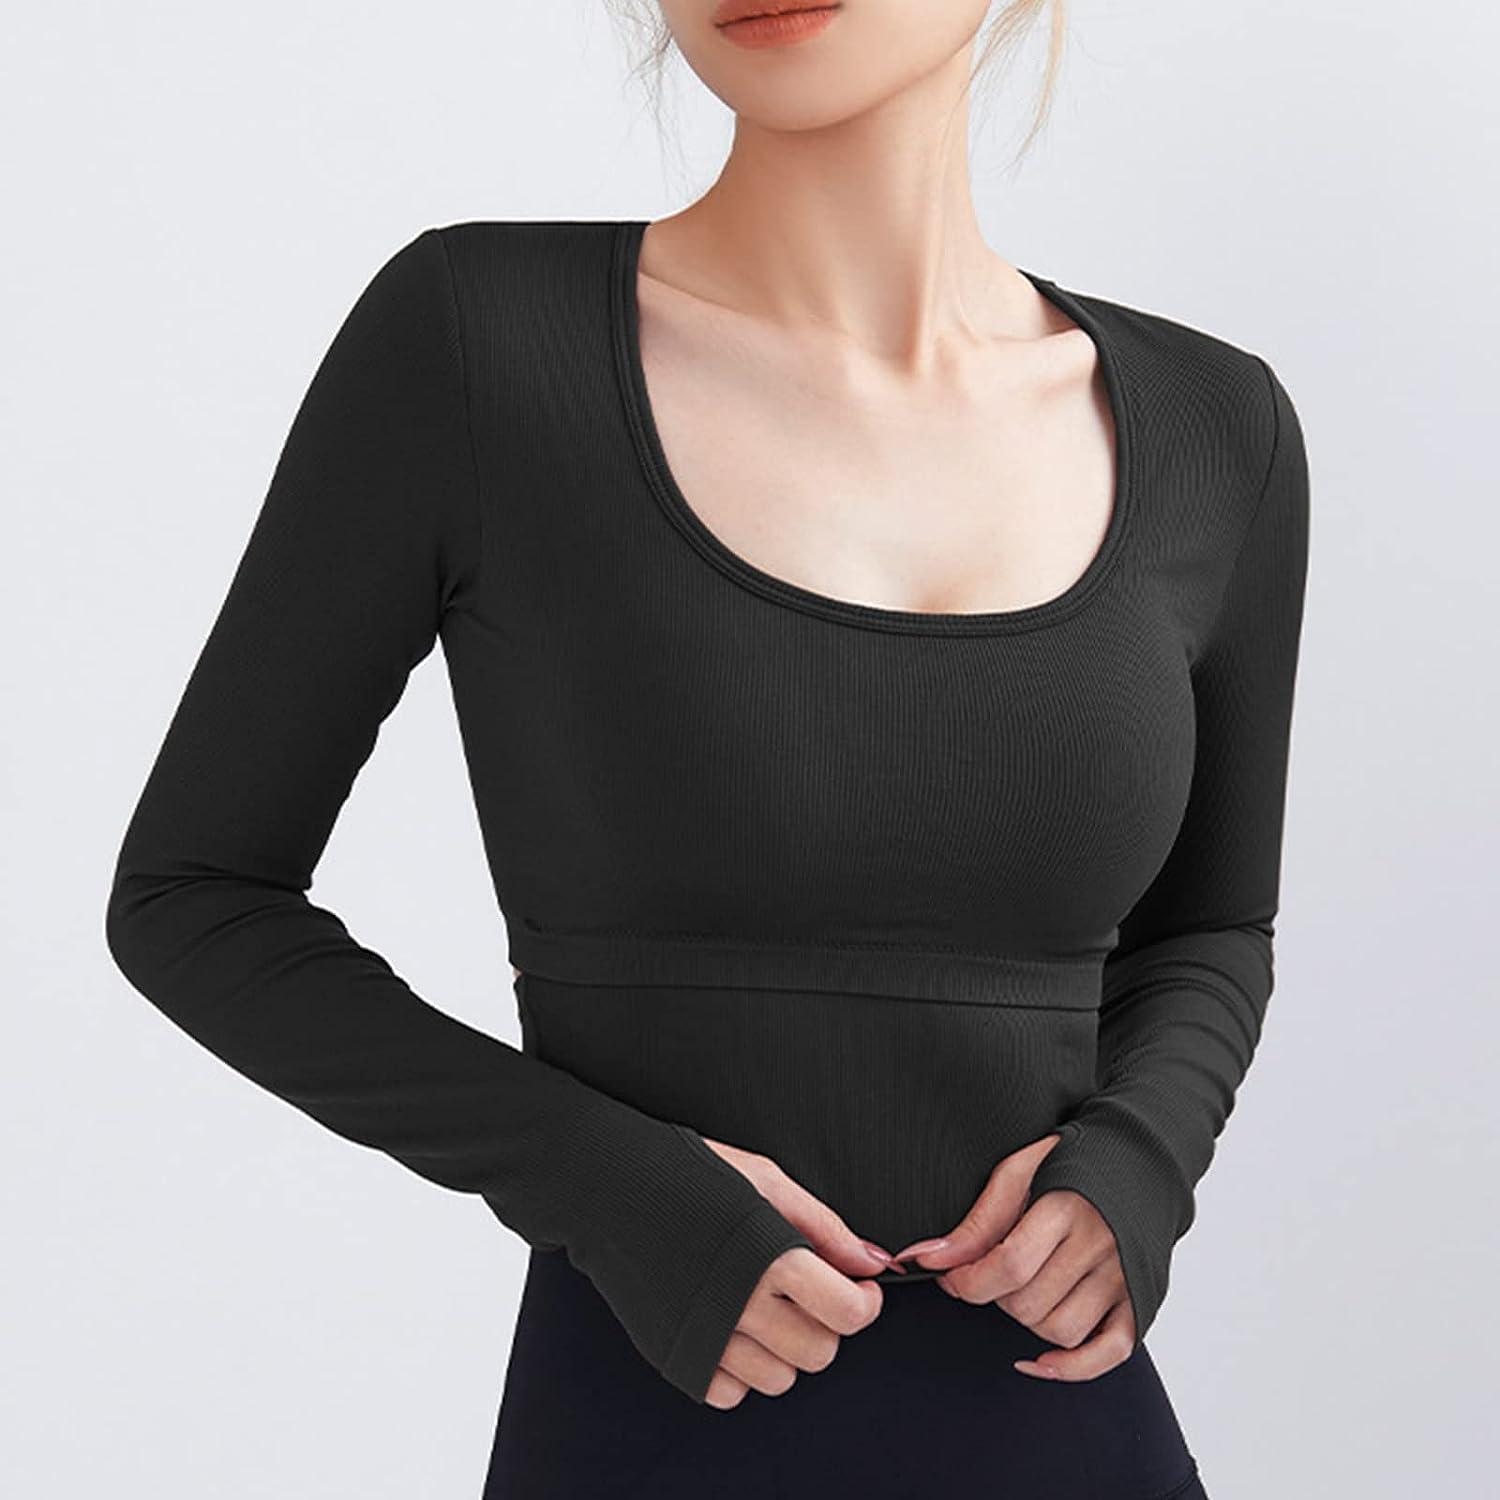 Women's Padded Sports Top Long Sleeve Strappy Backless Workout Tops With  Thumb Hole